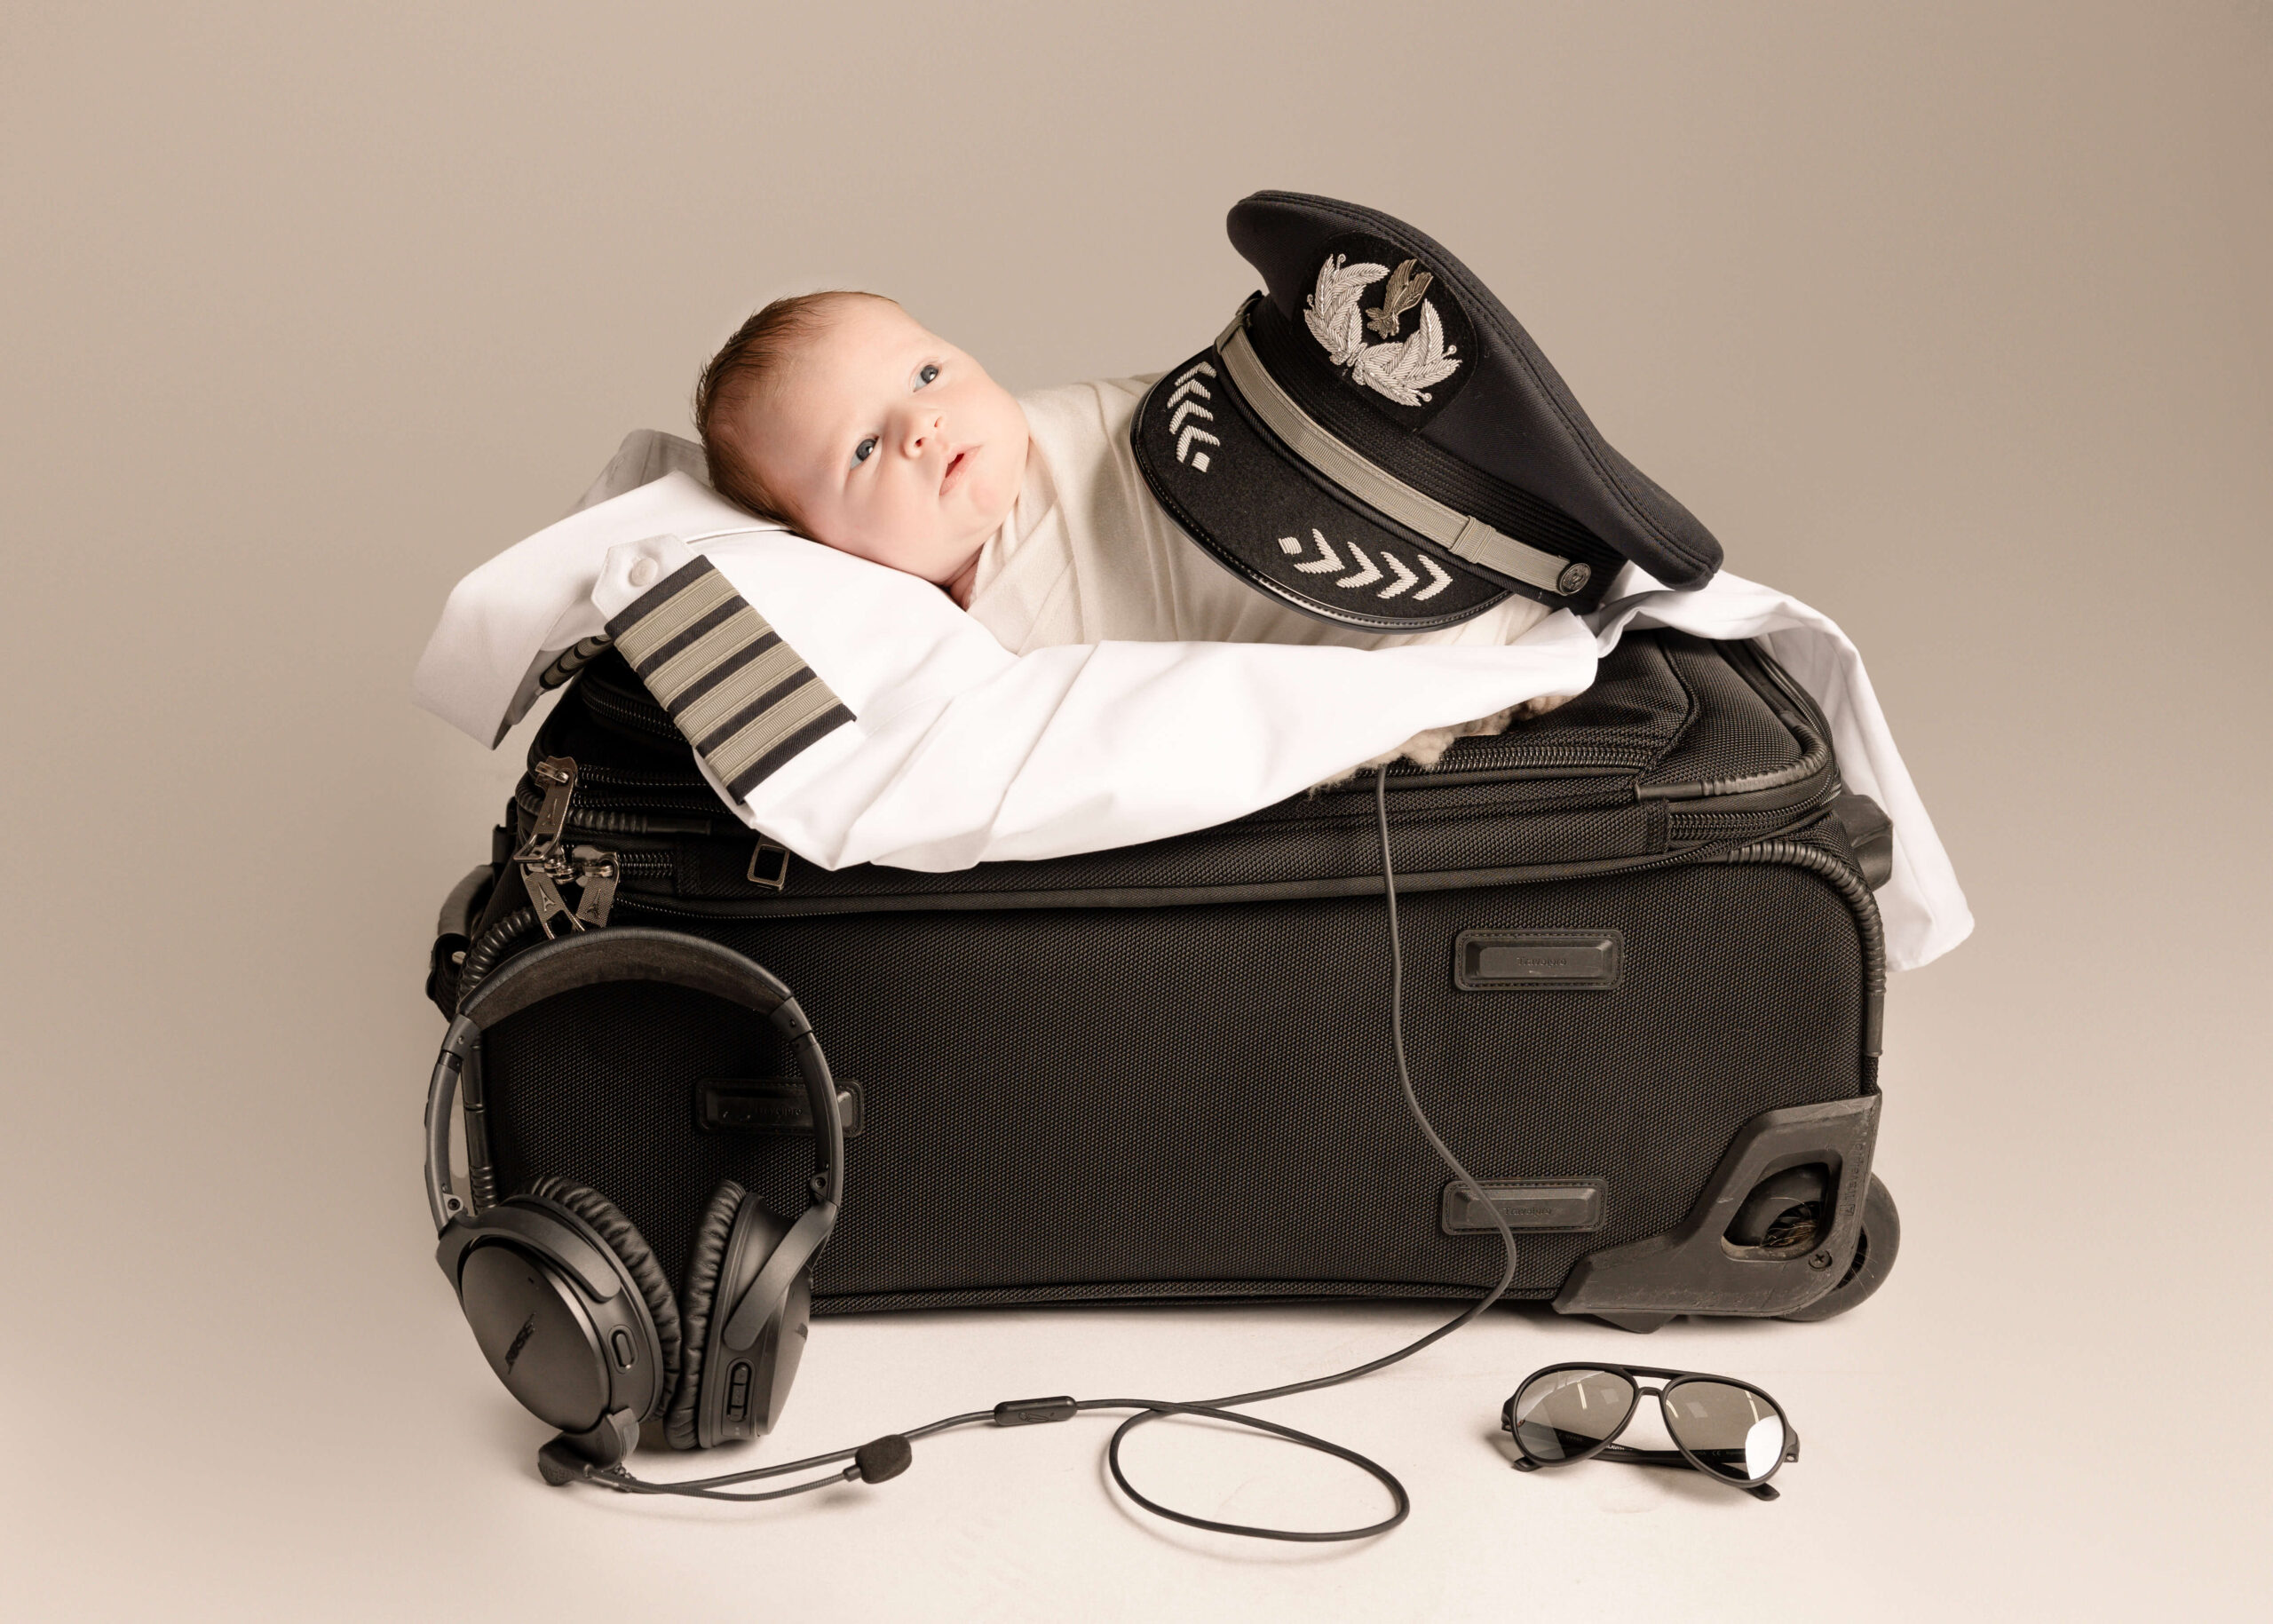 Baby posed on pilot dads suitcase with pilot shirt and hat in studio in Orange County, CA by Ashley Nicole.